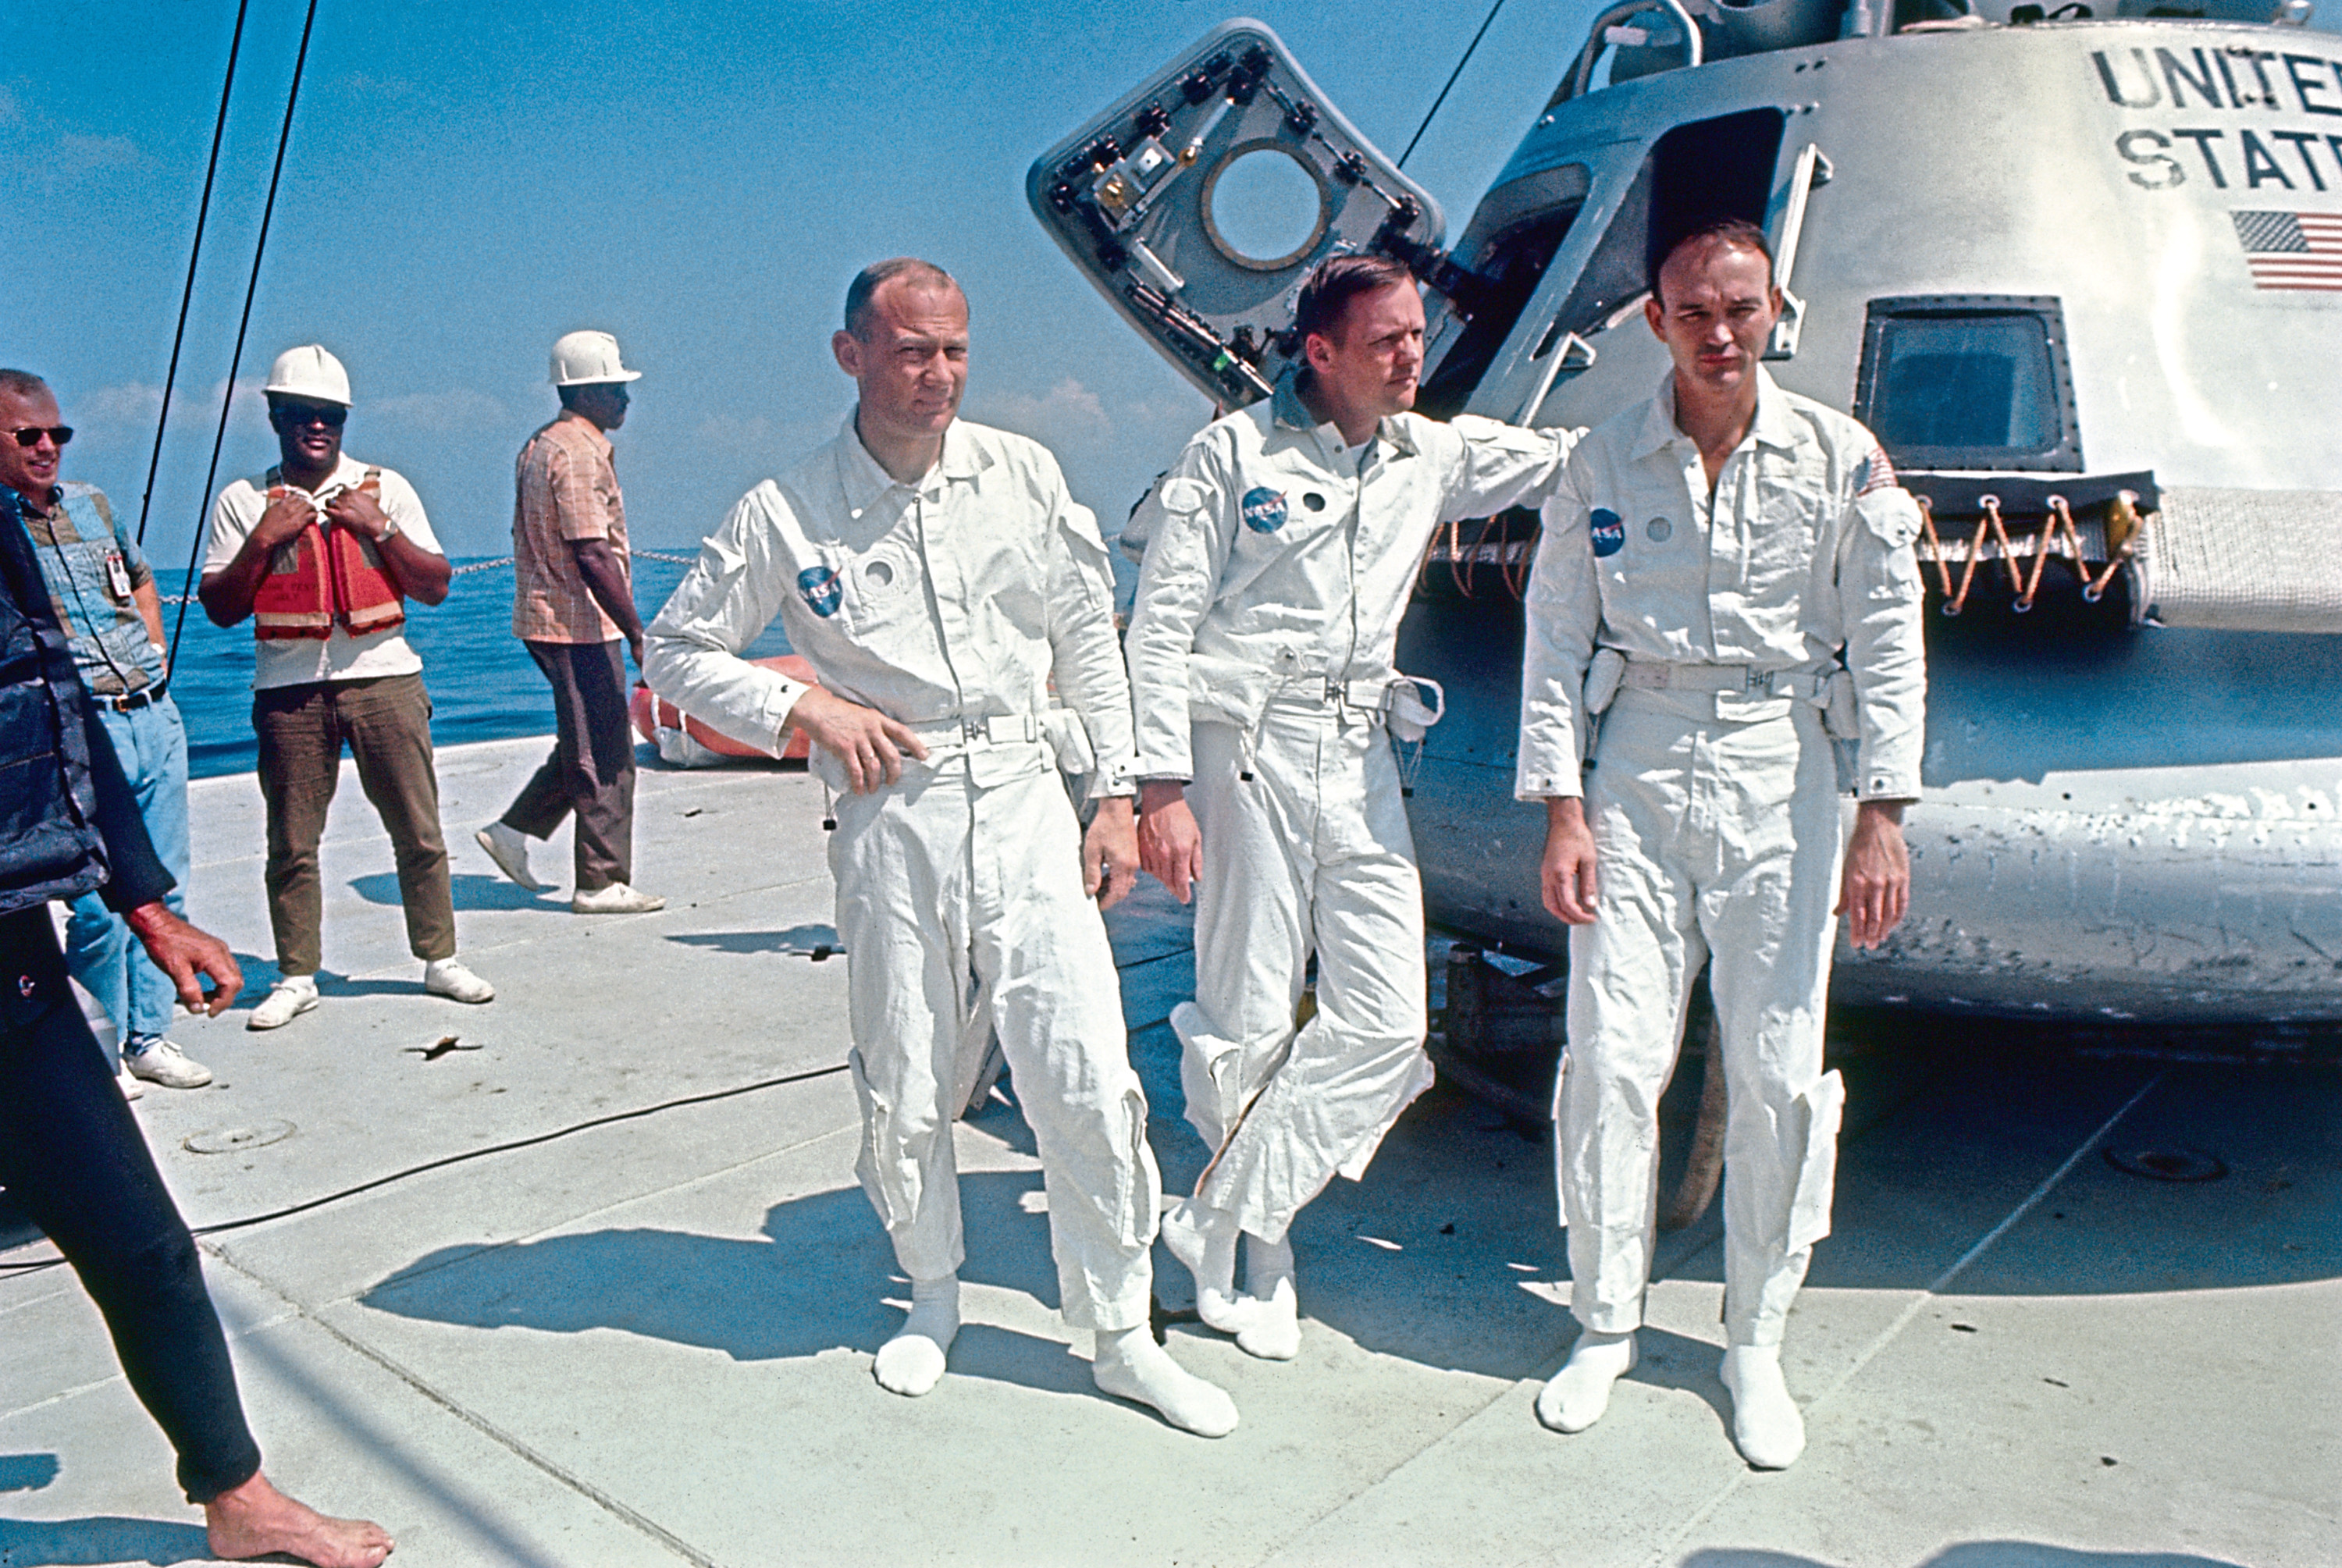 Apollo 11 astronauts Buzz Aldrin, Neil Armstrong and Michael Collins training in Houston ahead of their expedition to the moon